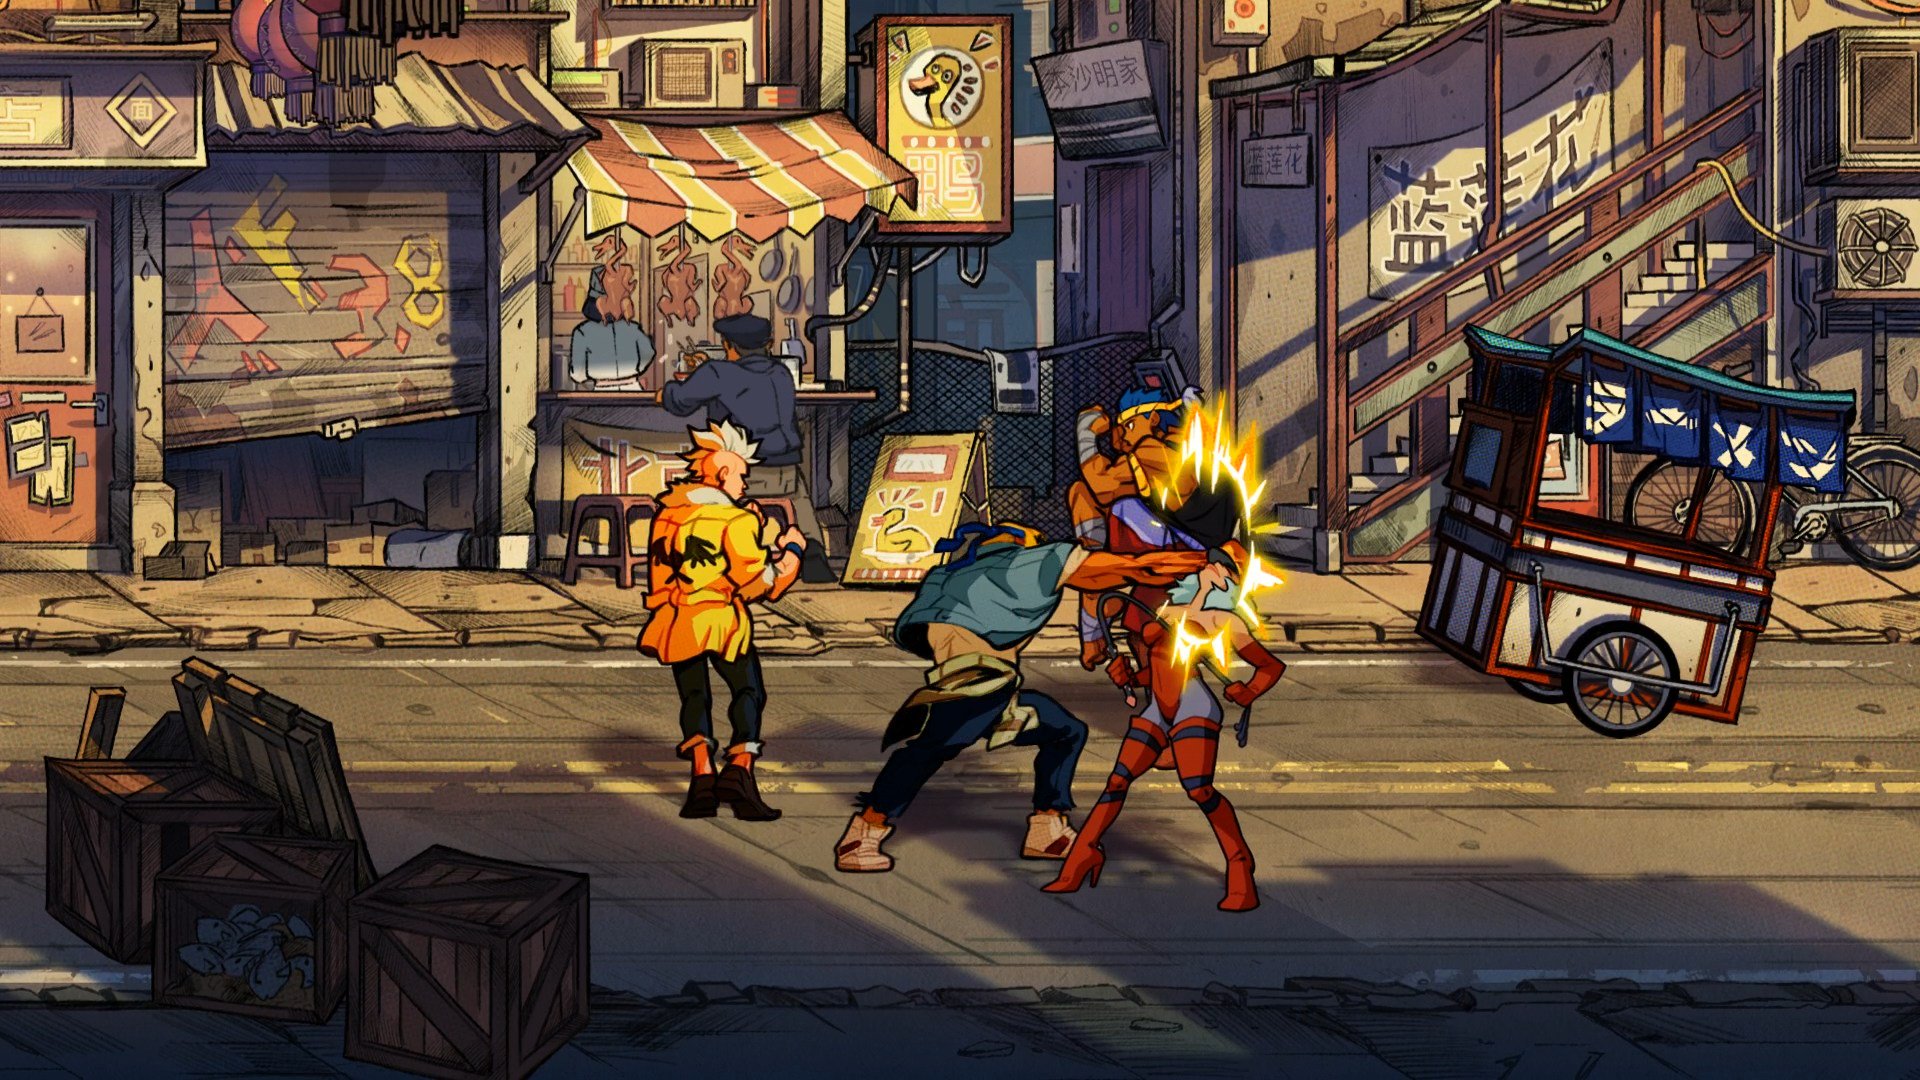 Gameplay Teaser Trailer for Streets of Rage 4